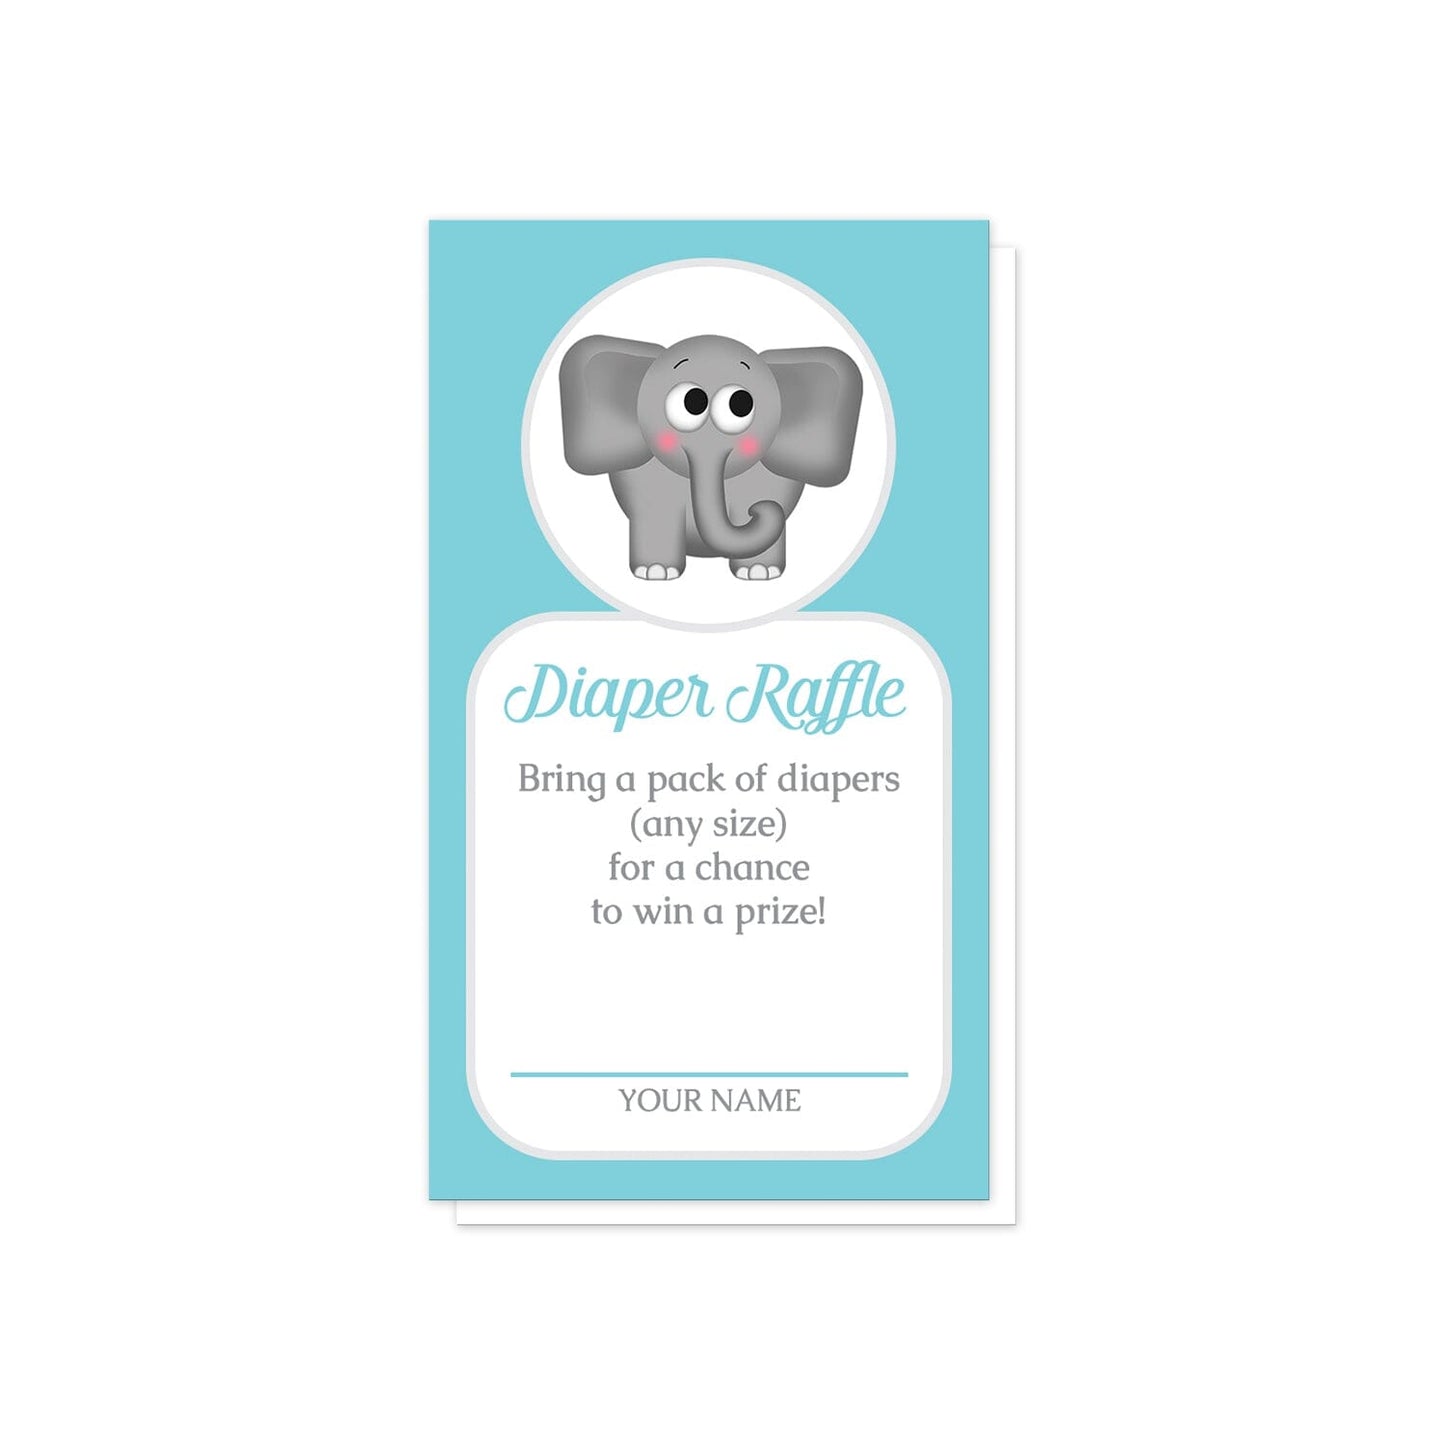 Cute Elephant Turquoise Diaper Raffle Cards at Artistically Invited. Cute elephant turquoise diaper raffle cards illustrated with an affectionate and adorable gray elephant in a white circle over a turquoise background color. Your diaper raffle details are printed in turquoise and gray in a white rectangular area below the cute little elephant.